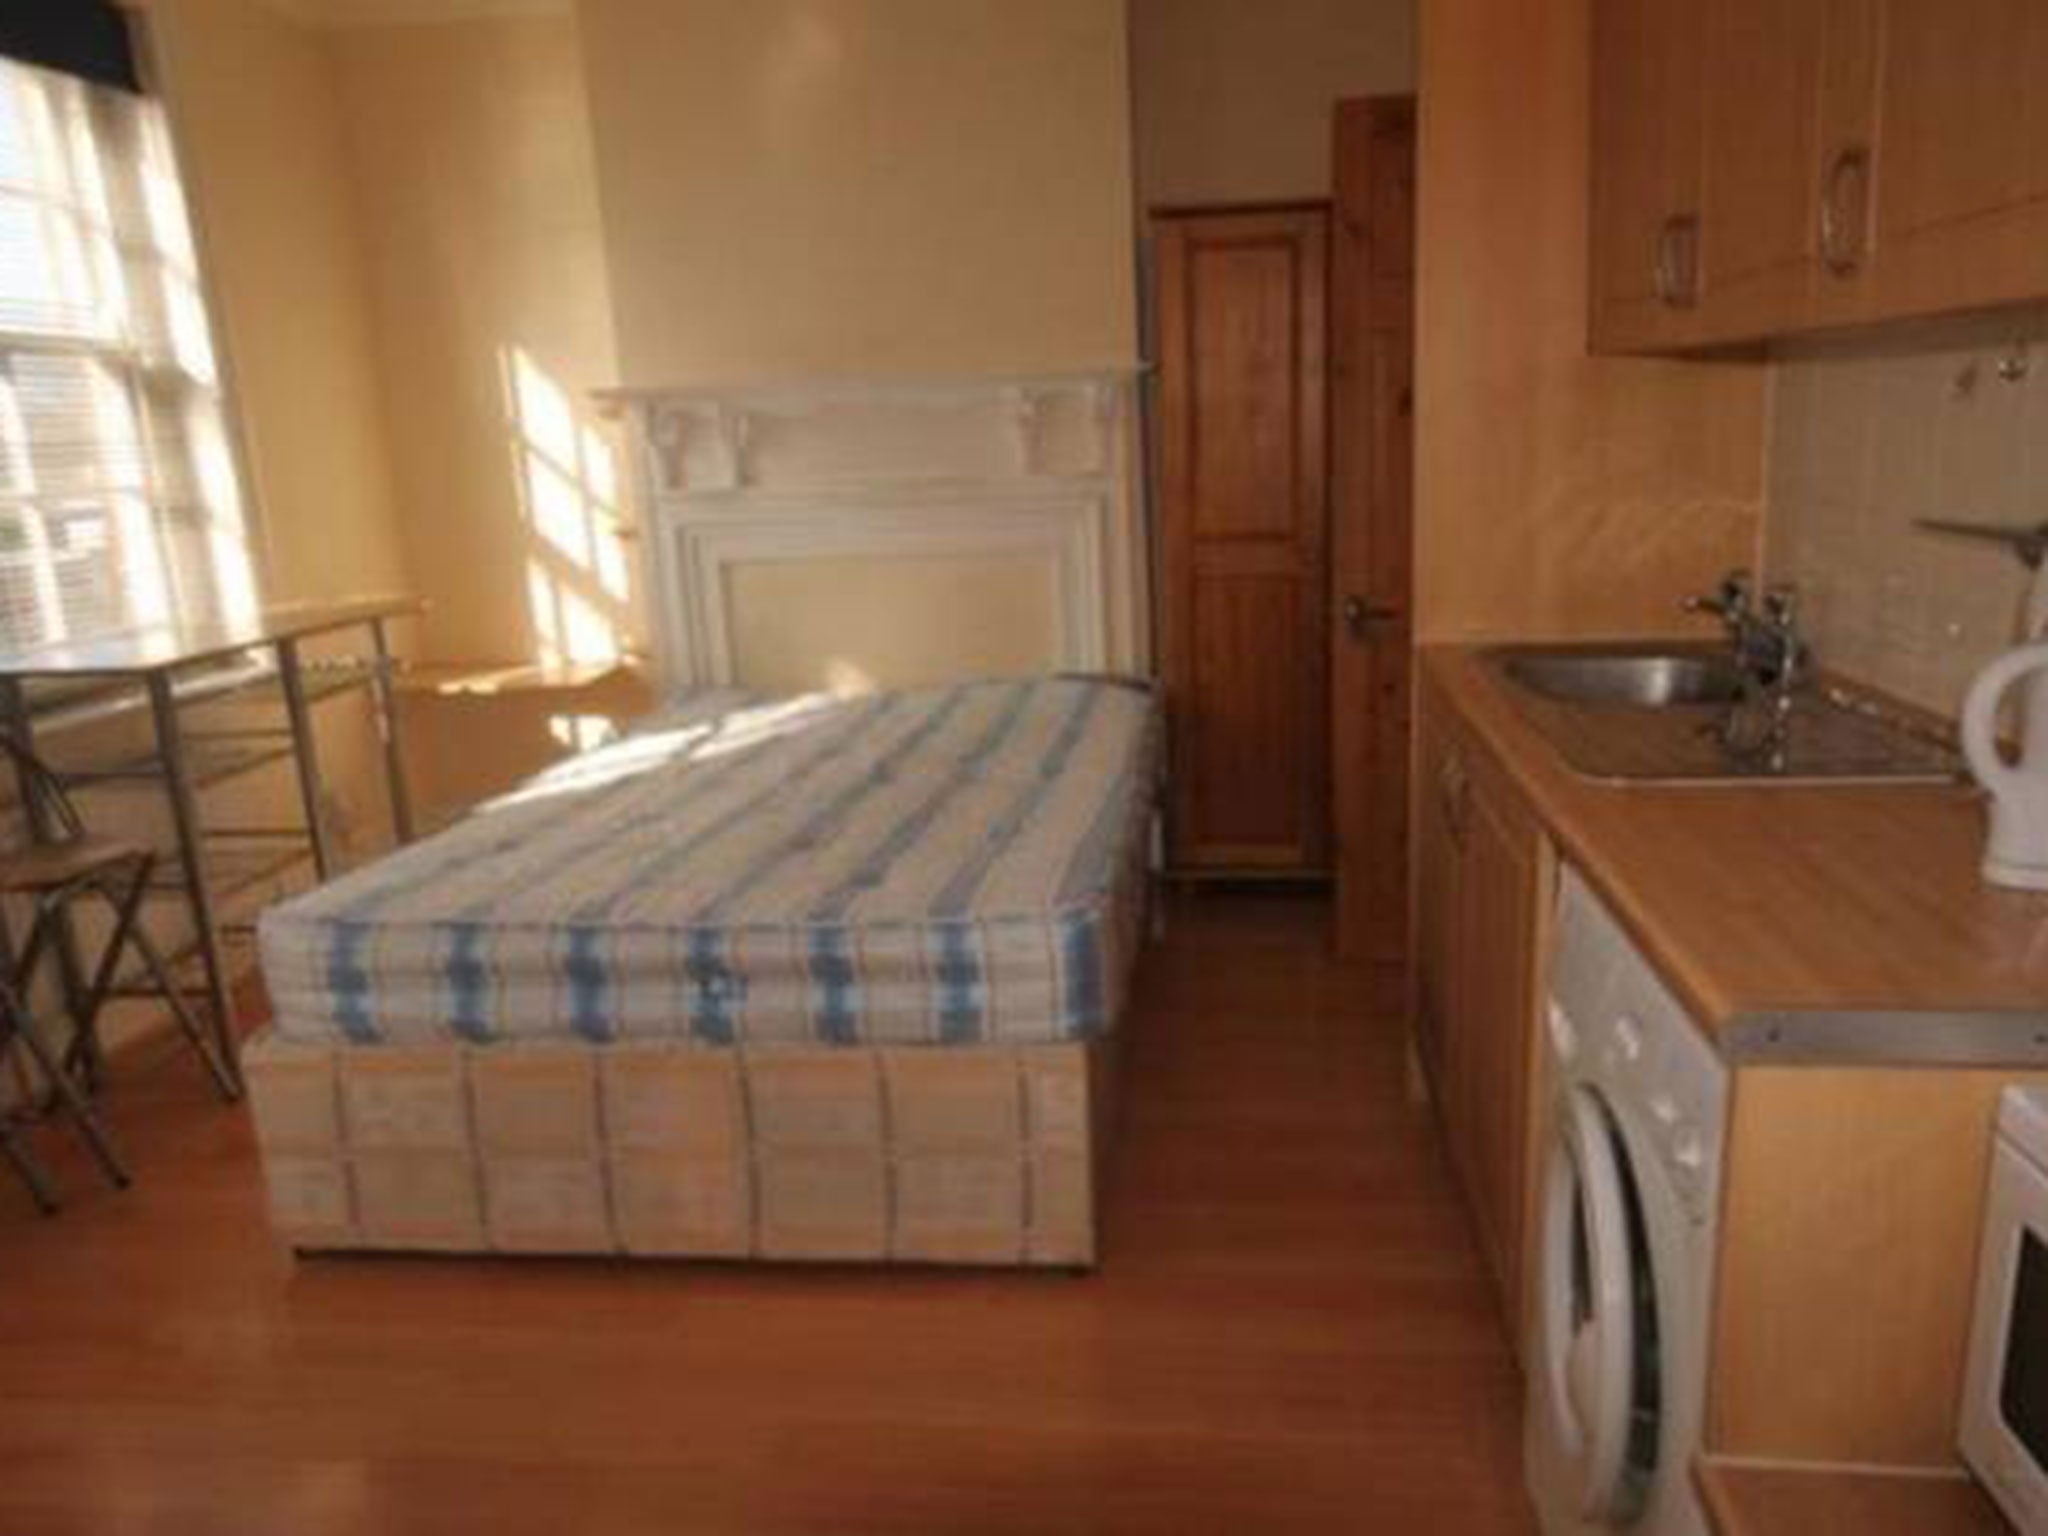 This Ealing flat was available to rent for £804 per month